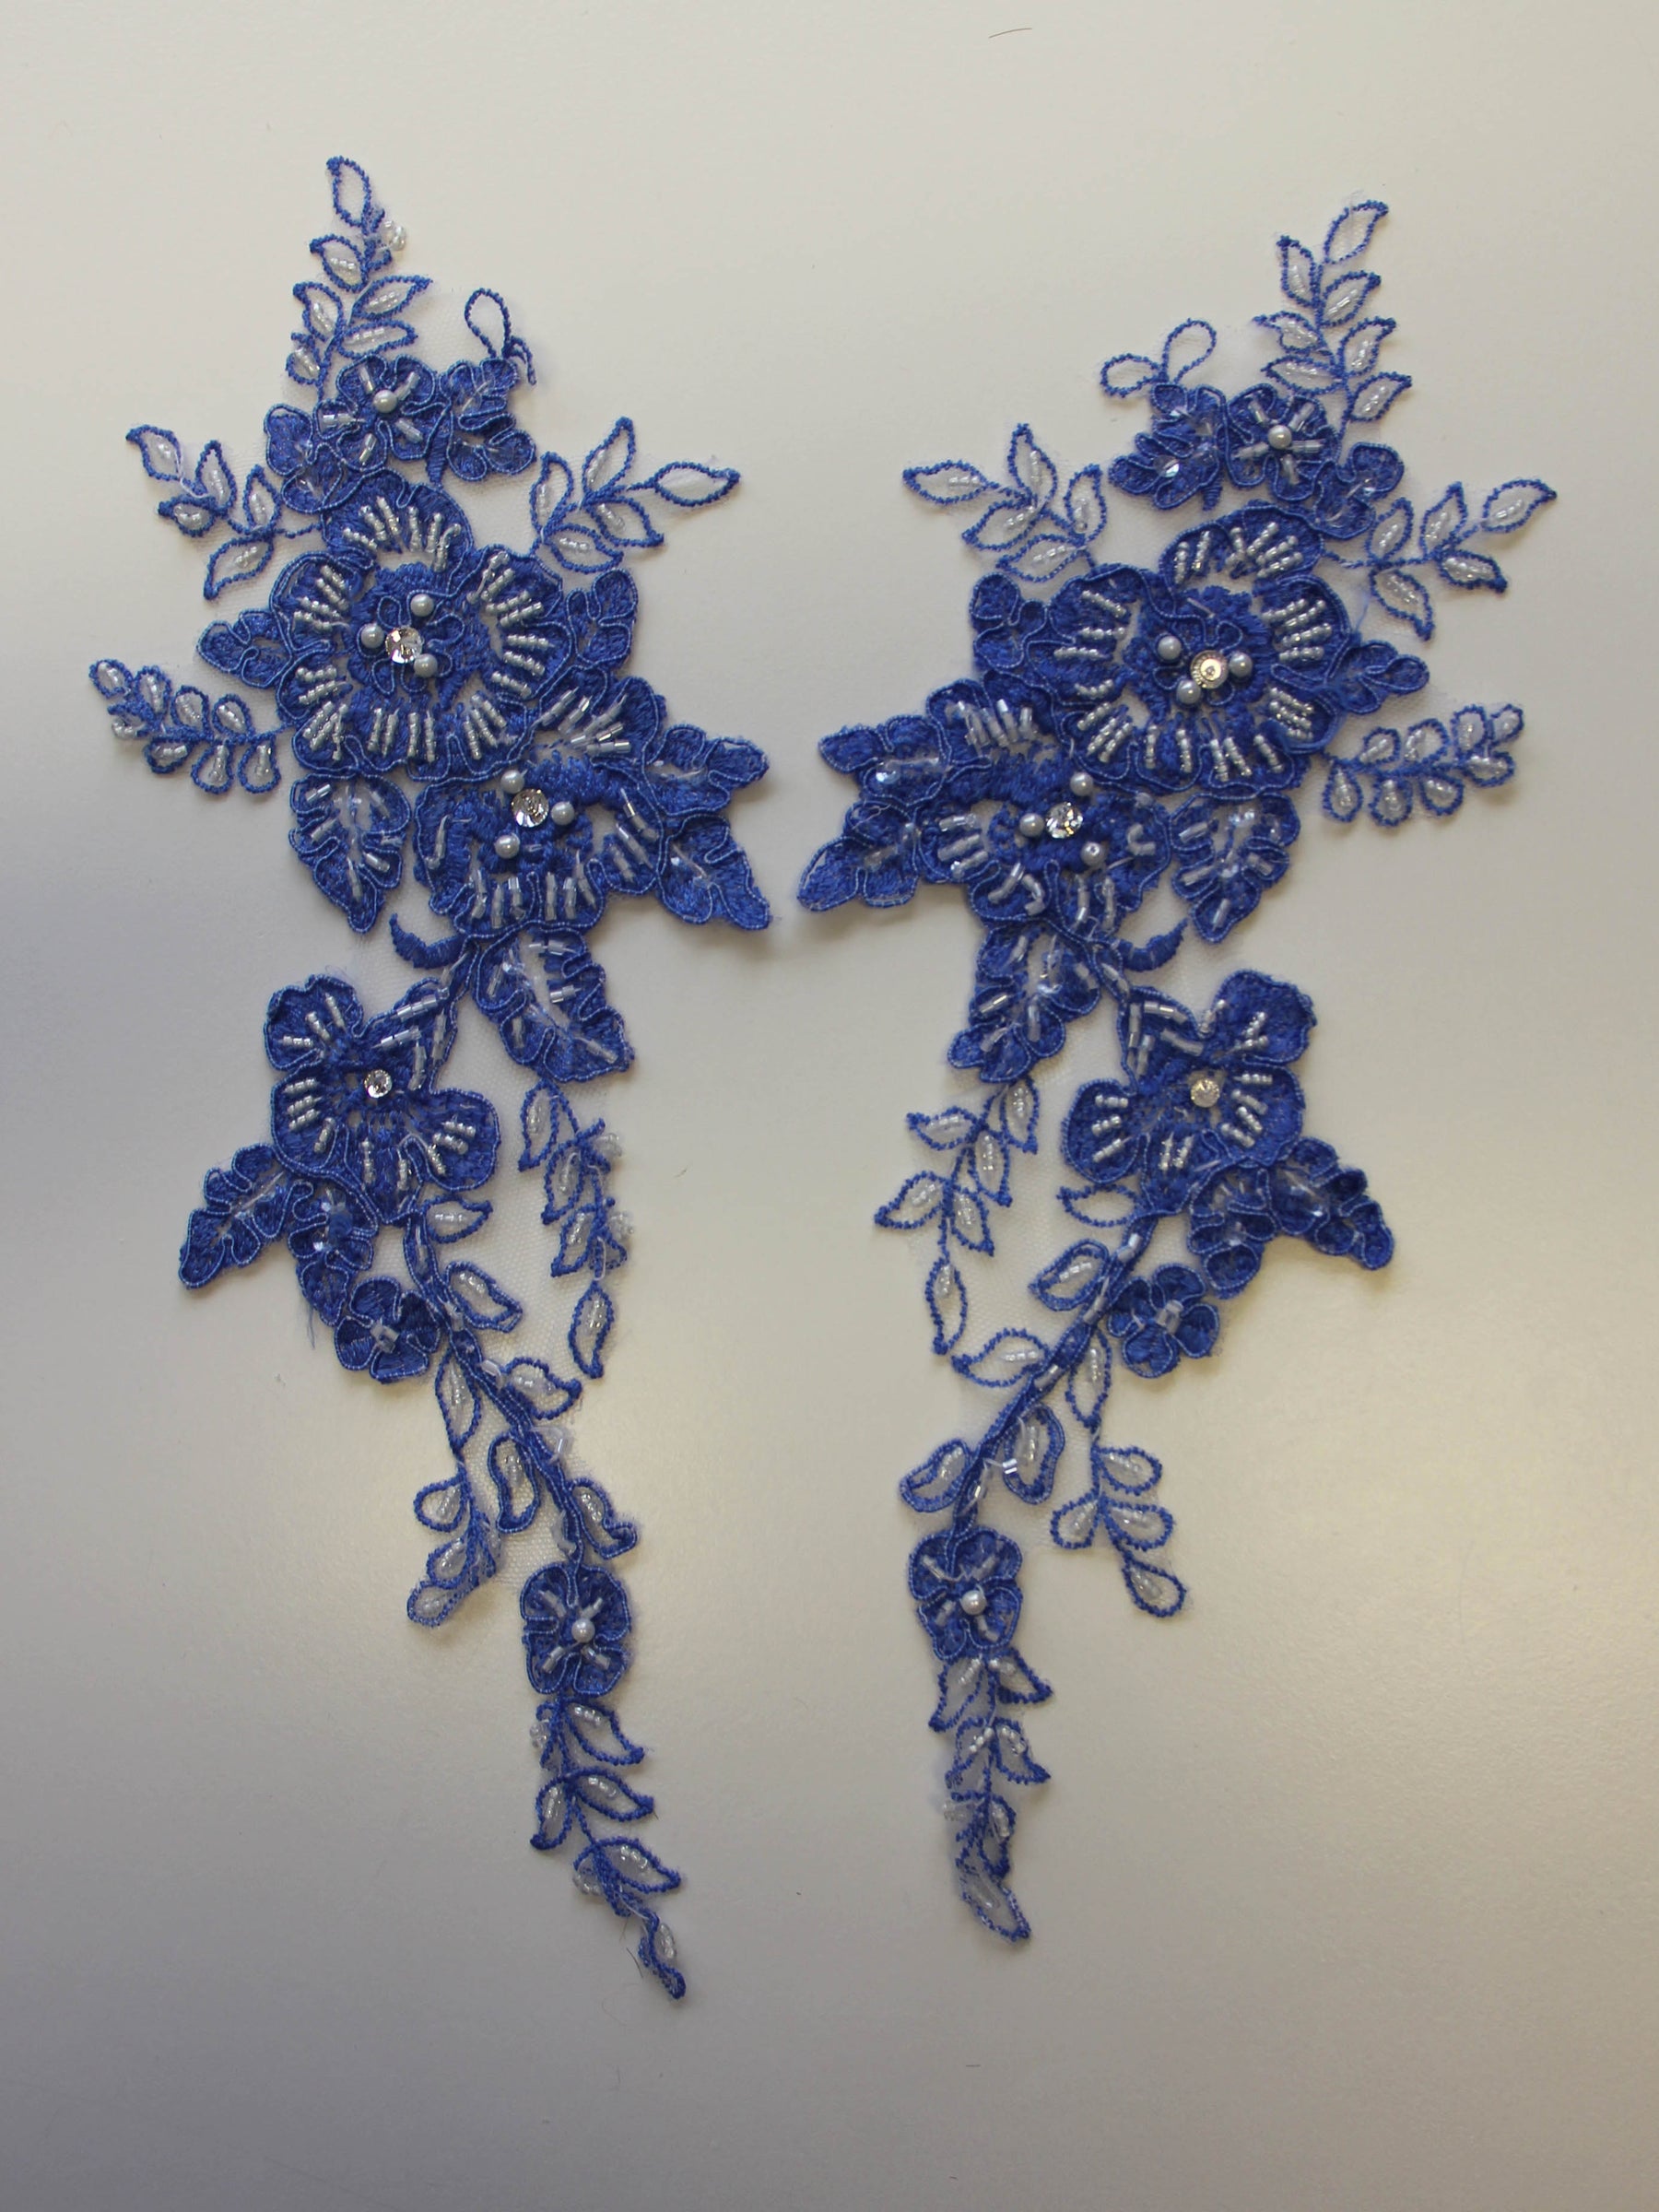 Ocean Blue Beaded and Corded Lace Appliques - Poppy